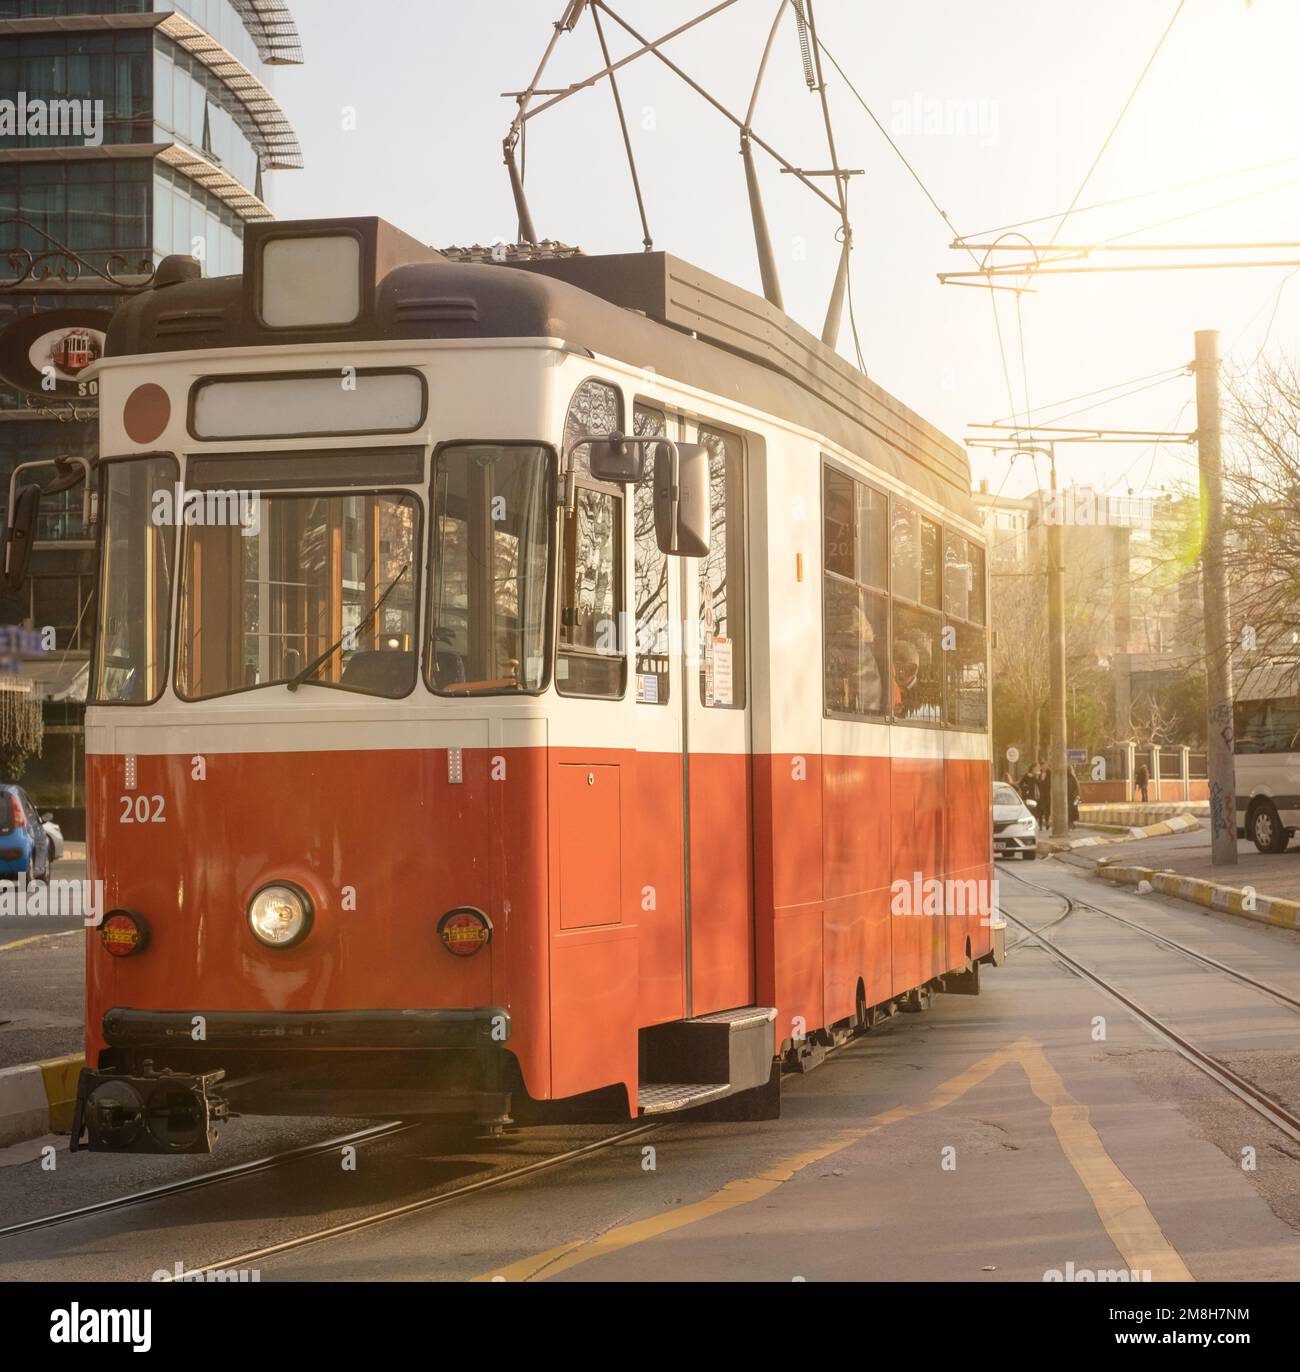 Retro Tram Or Tramway. Retro Tram Stopped At a Stop And Sunlight Stock Photo